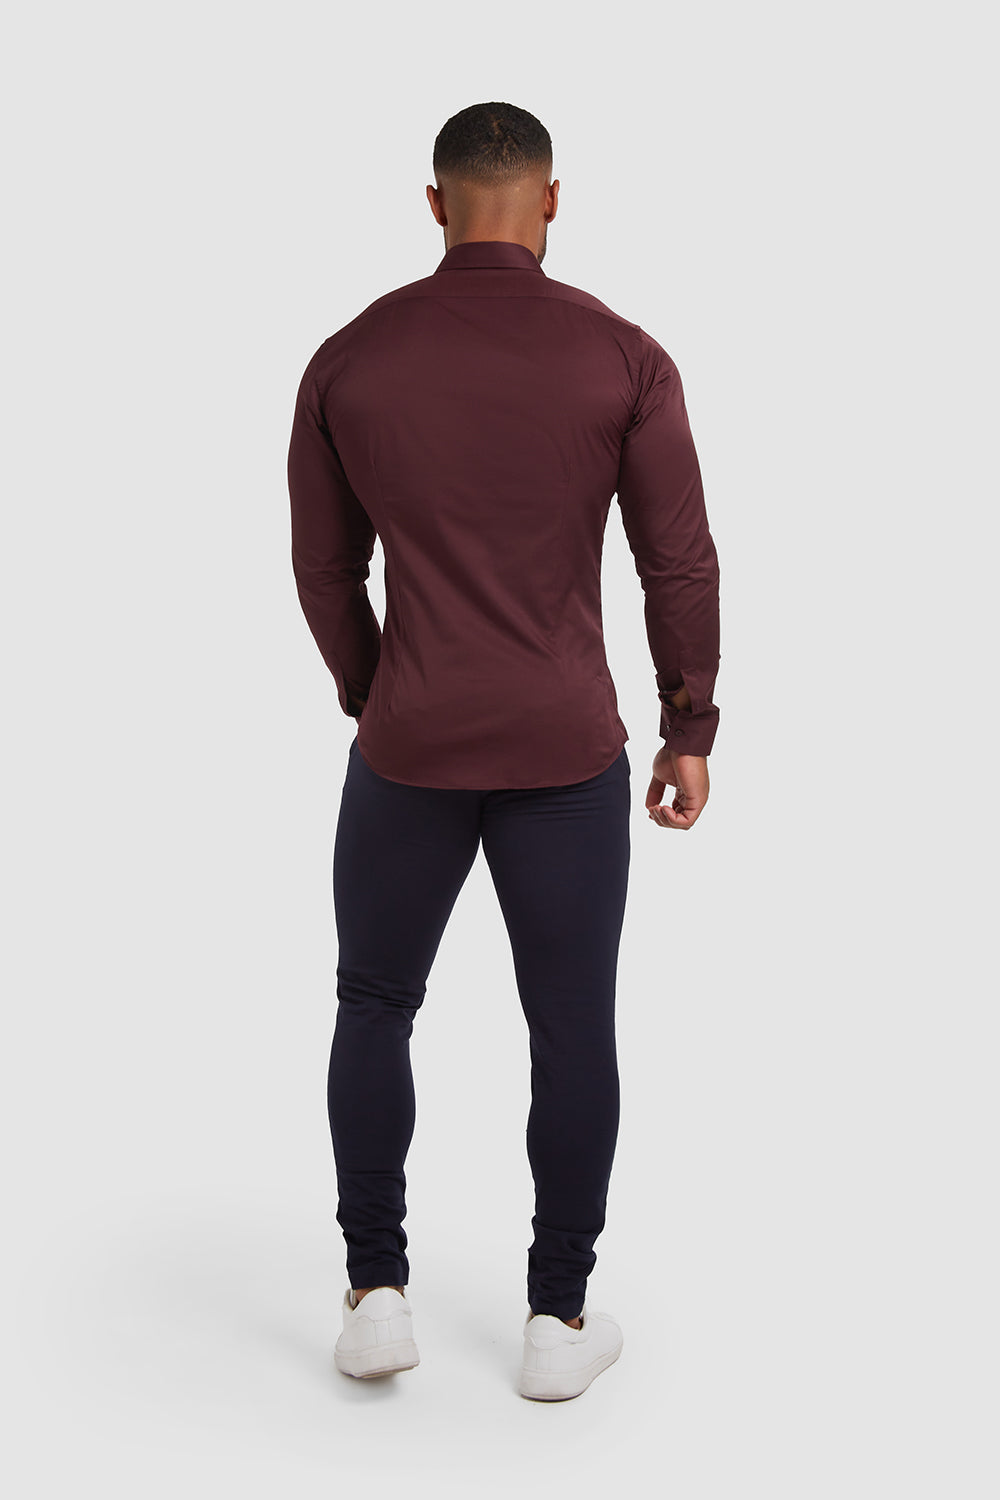 Burgundy USA 2.0 ATHLETE Shirt - Fit in Muscle Signature - TAILORED